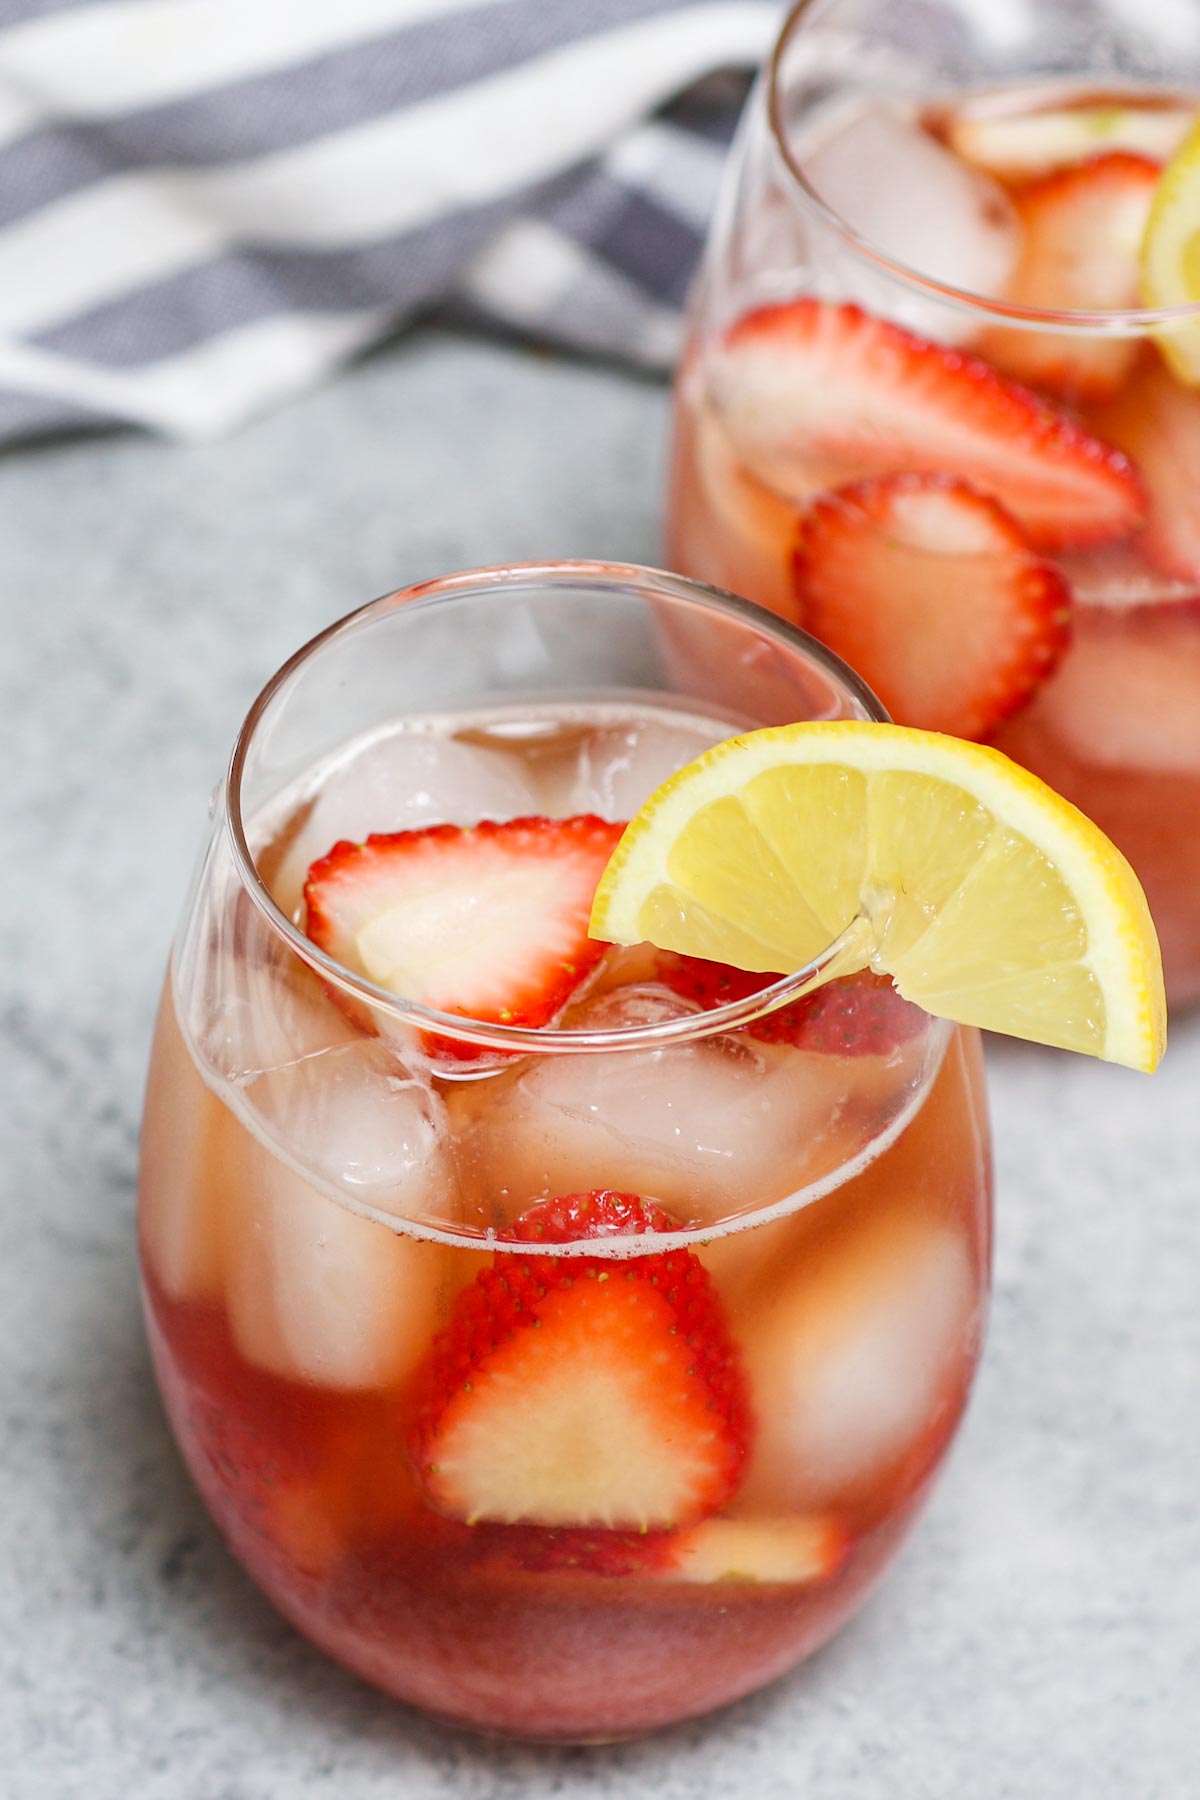 Strawberry Hennessy is the flavor combo you never knew you needed. The rich, smooth taste of cognac, paired with bubbly champagne and sweet strawberry syrup is incredibly refreshing and delicious. If you like to get lit with a fruity margarita cocktail, you’re sure to enjoy this one!